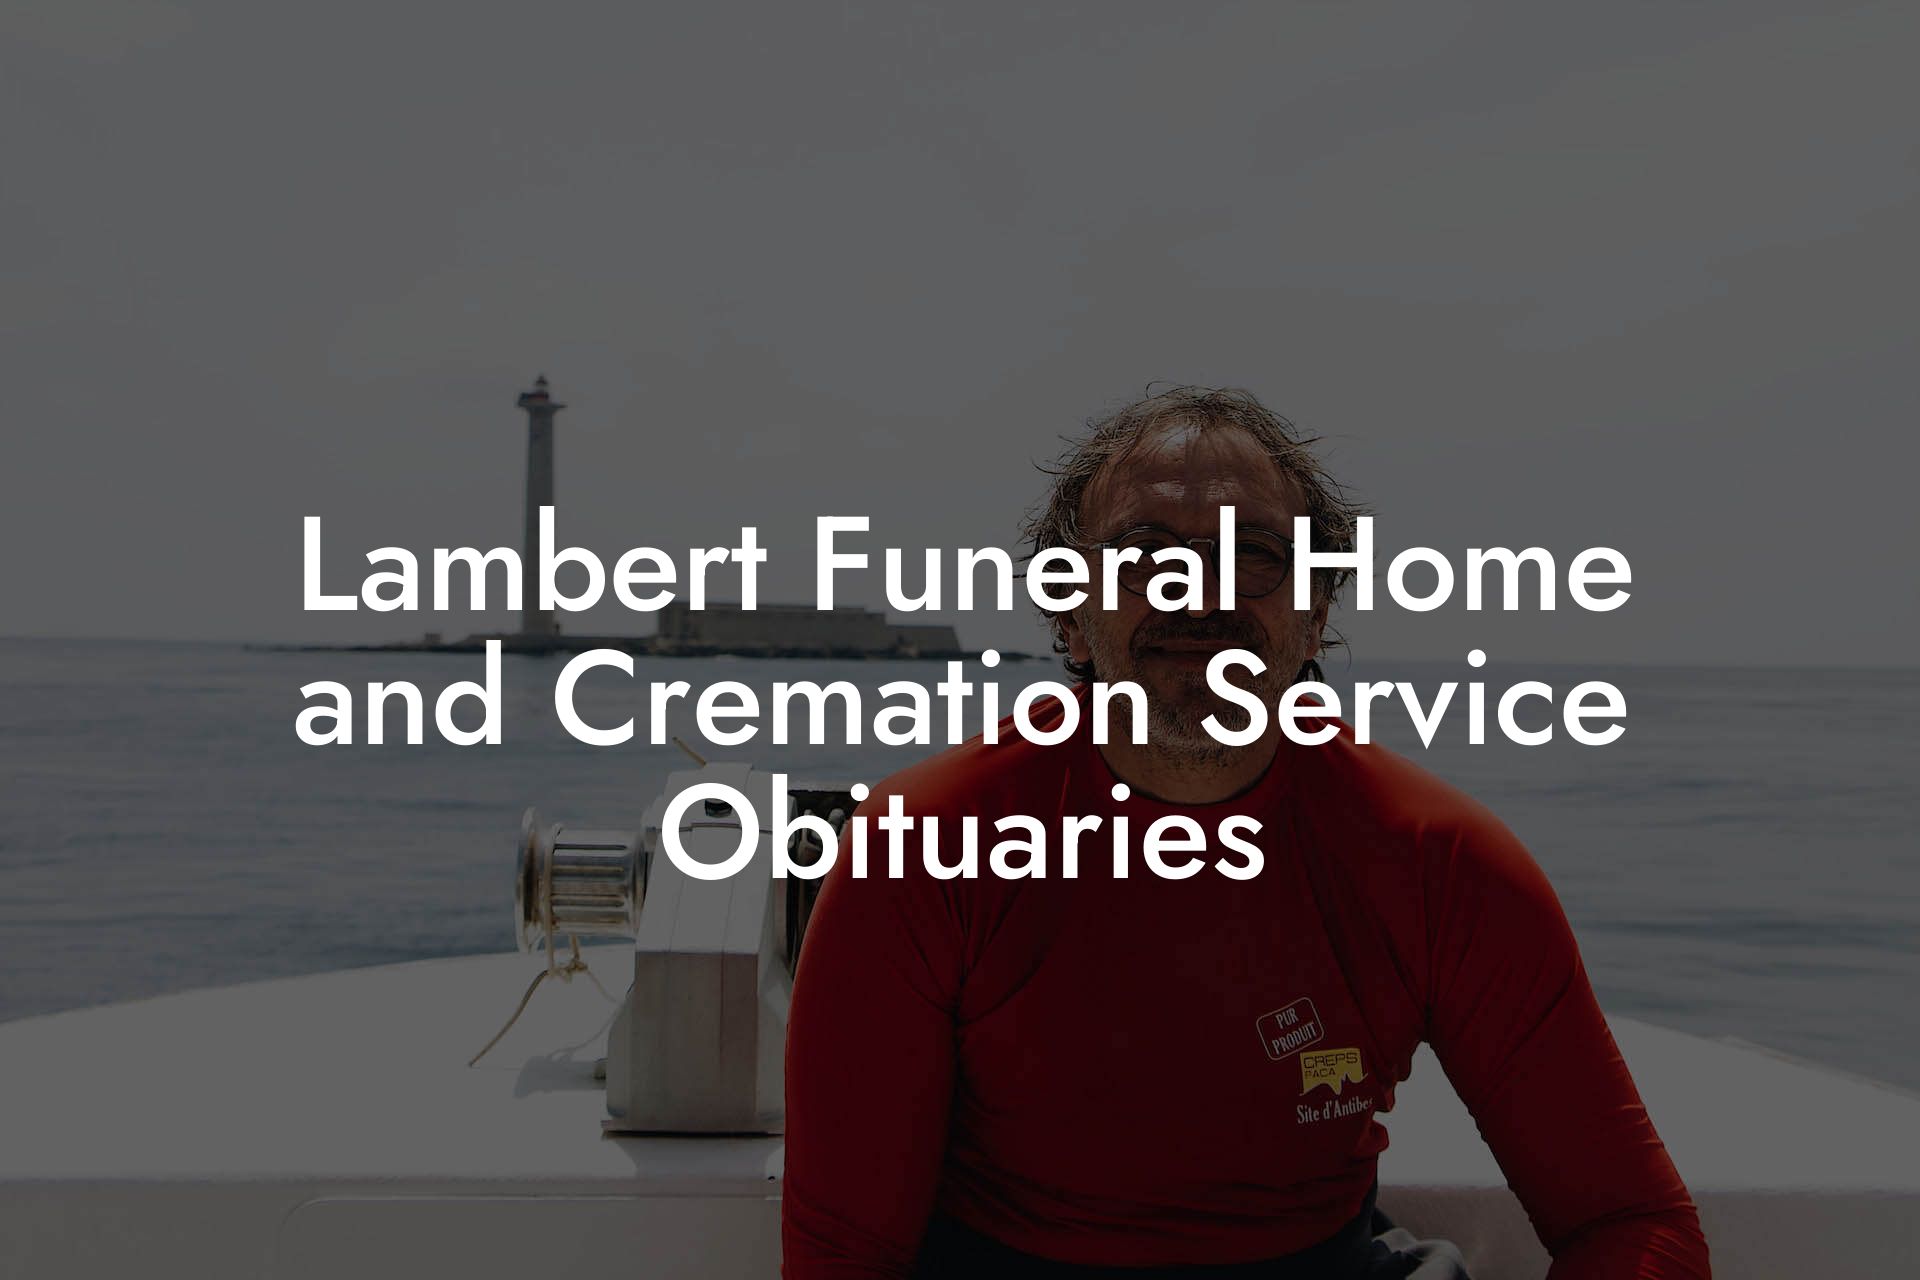 Lambert Funeral Home and Cremation Service Obituaries